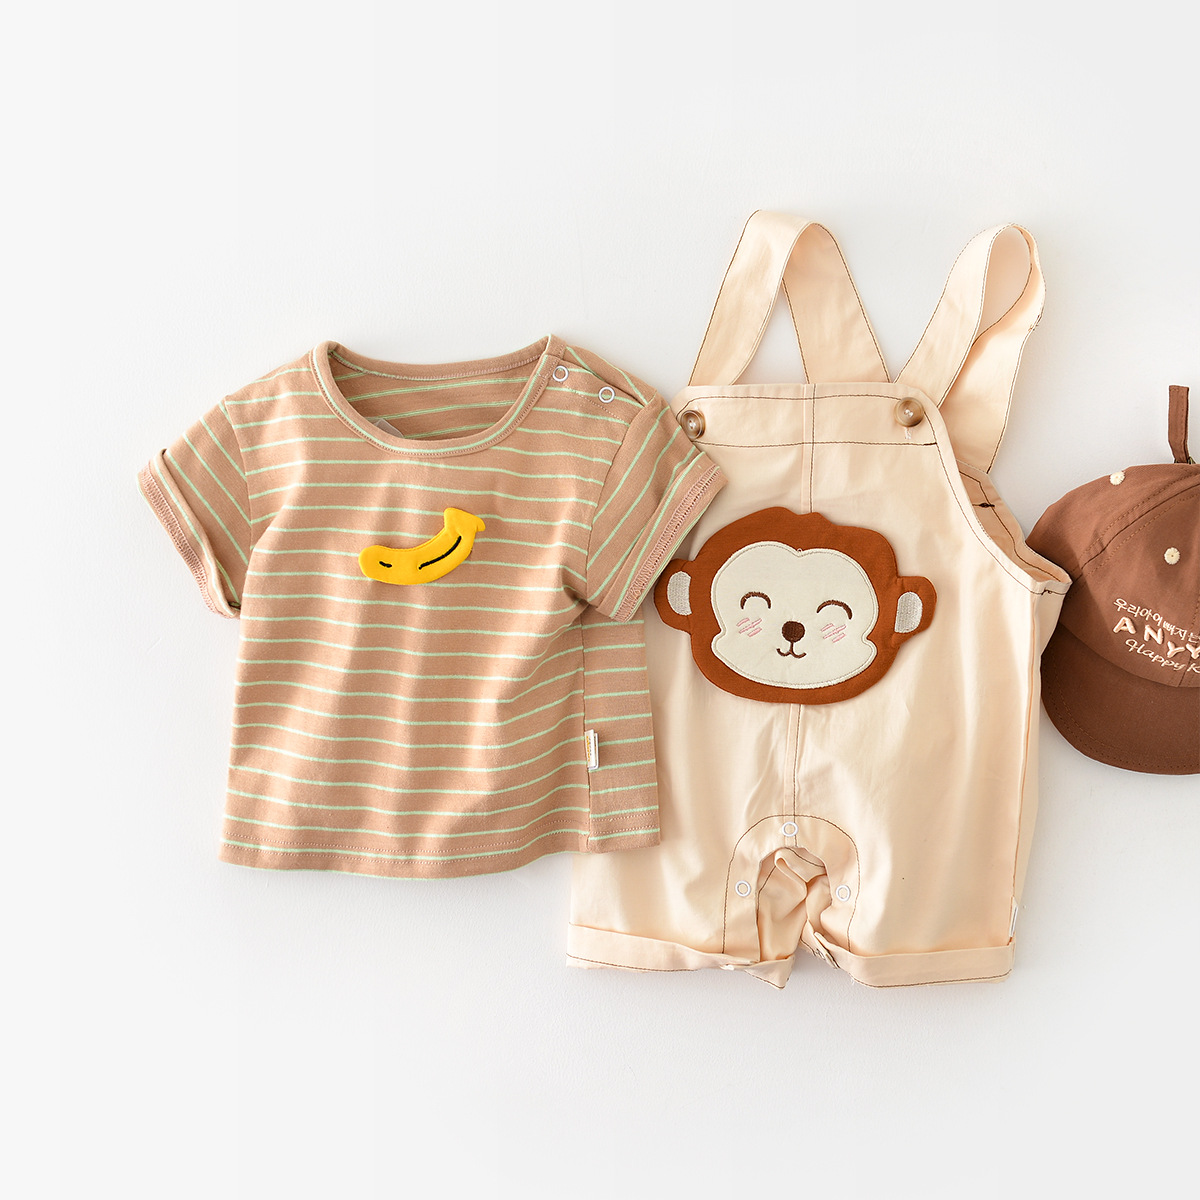 Eco-Friendly Clothes for Active Kids kids clothing babys clothing Practical and Adorable Wardrobe Staples